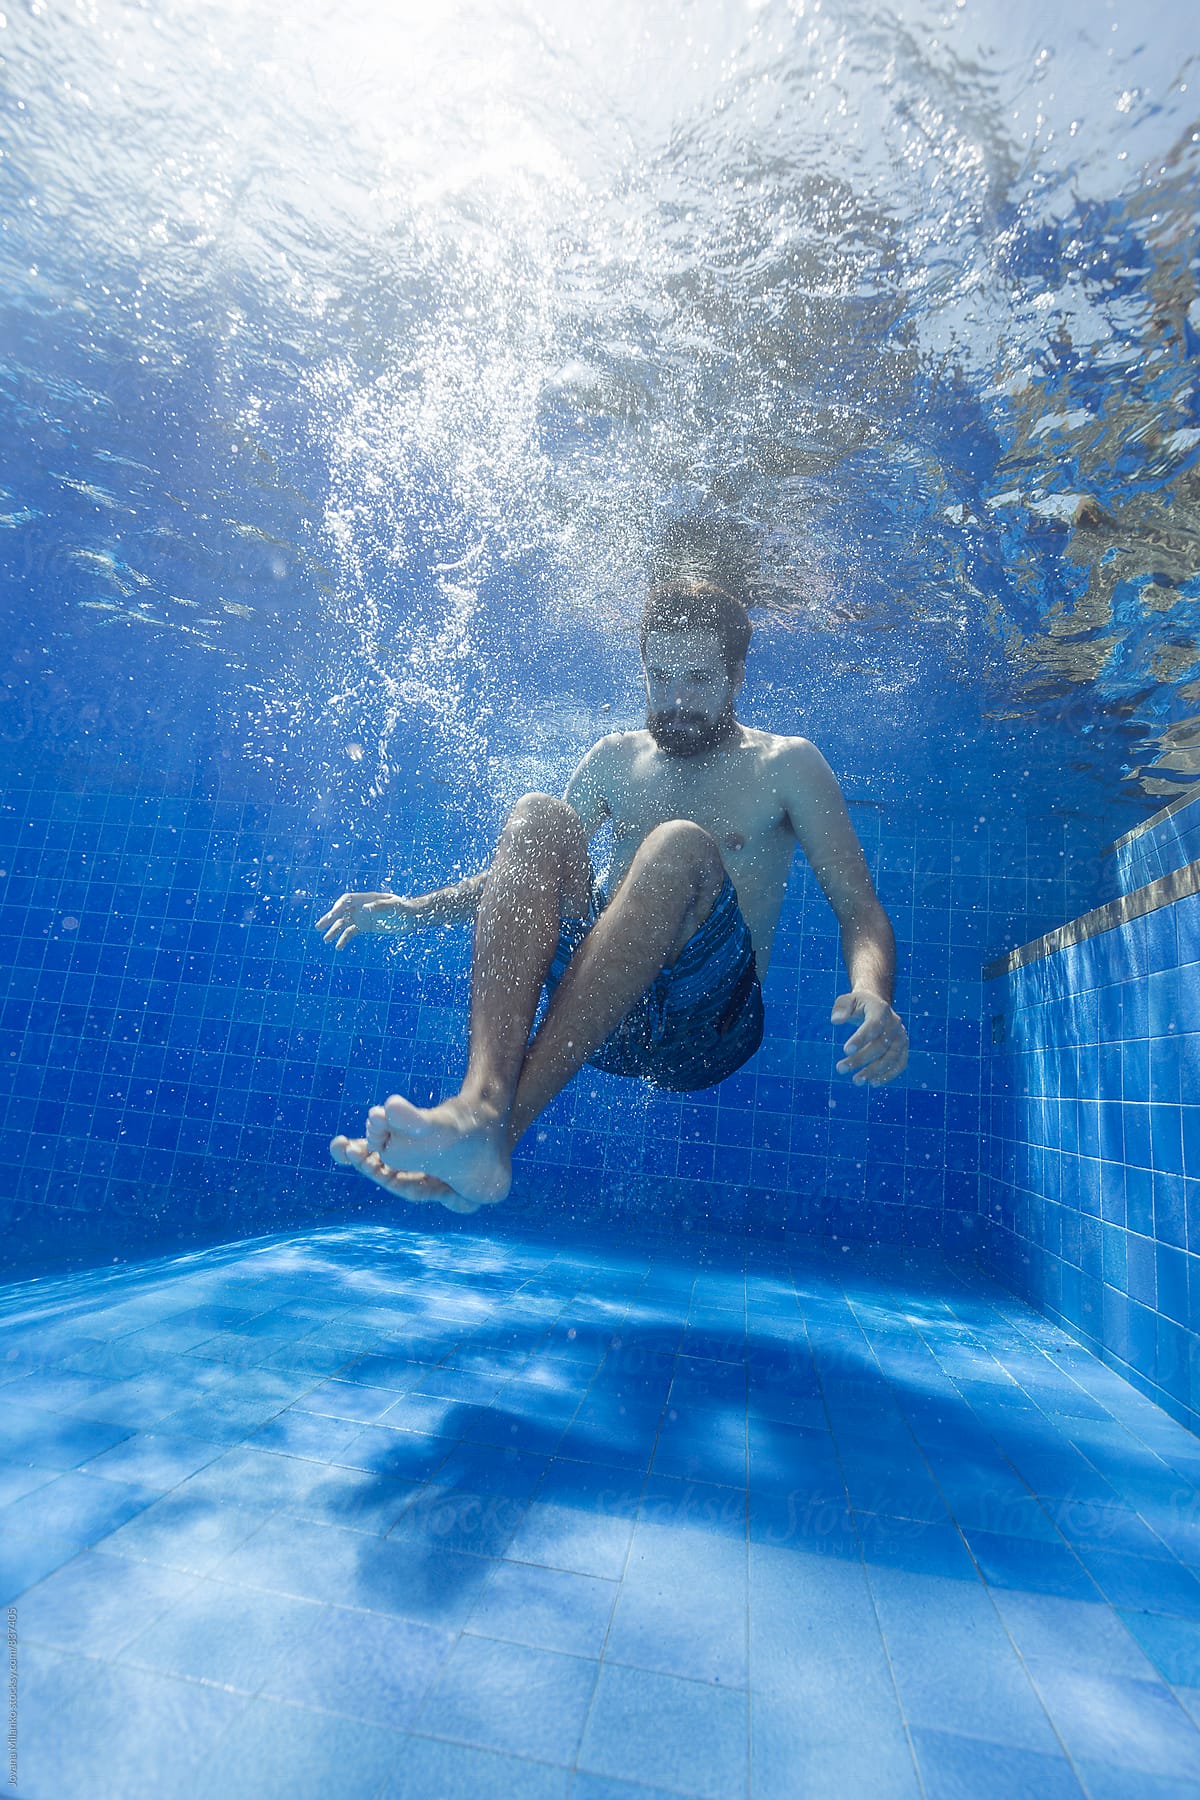 Man underwater in the pool after a jump